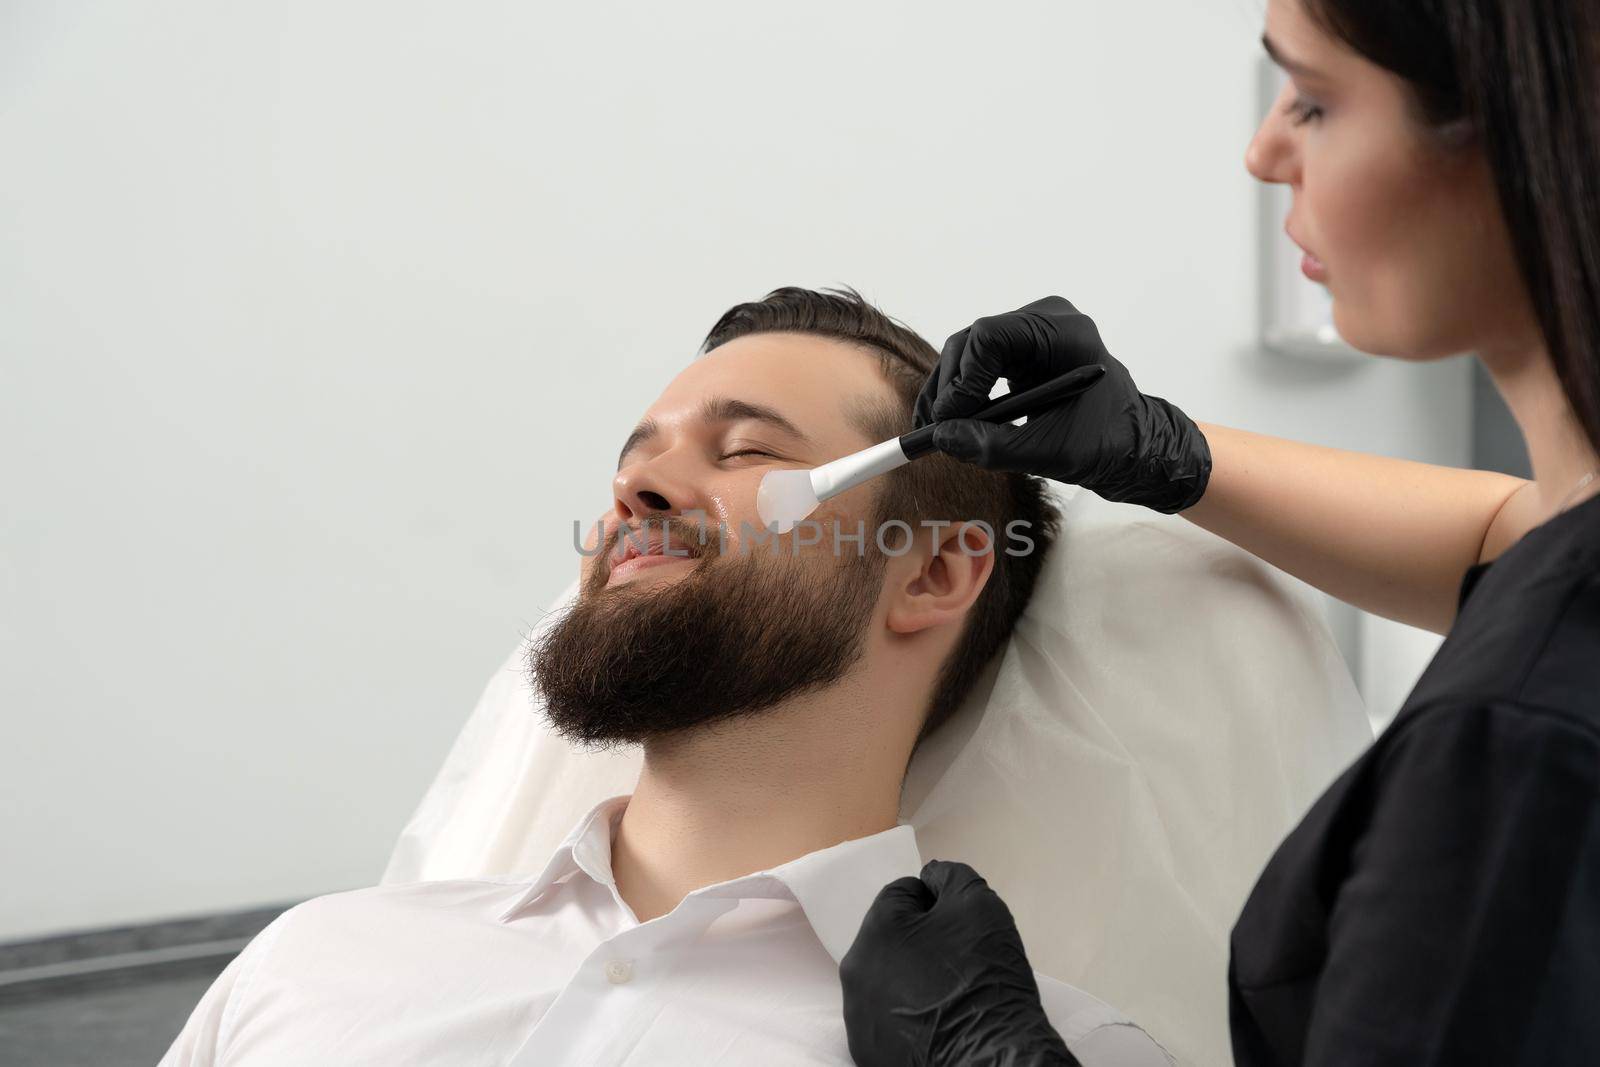 Bearded man getting laser facial treatment by professional cosmetologist in beauty clinic. Healthy man lifestyle concept